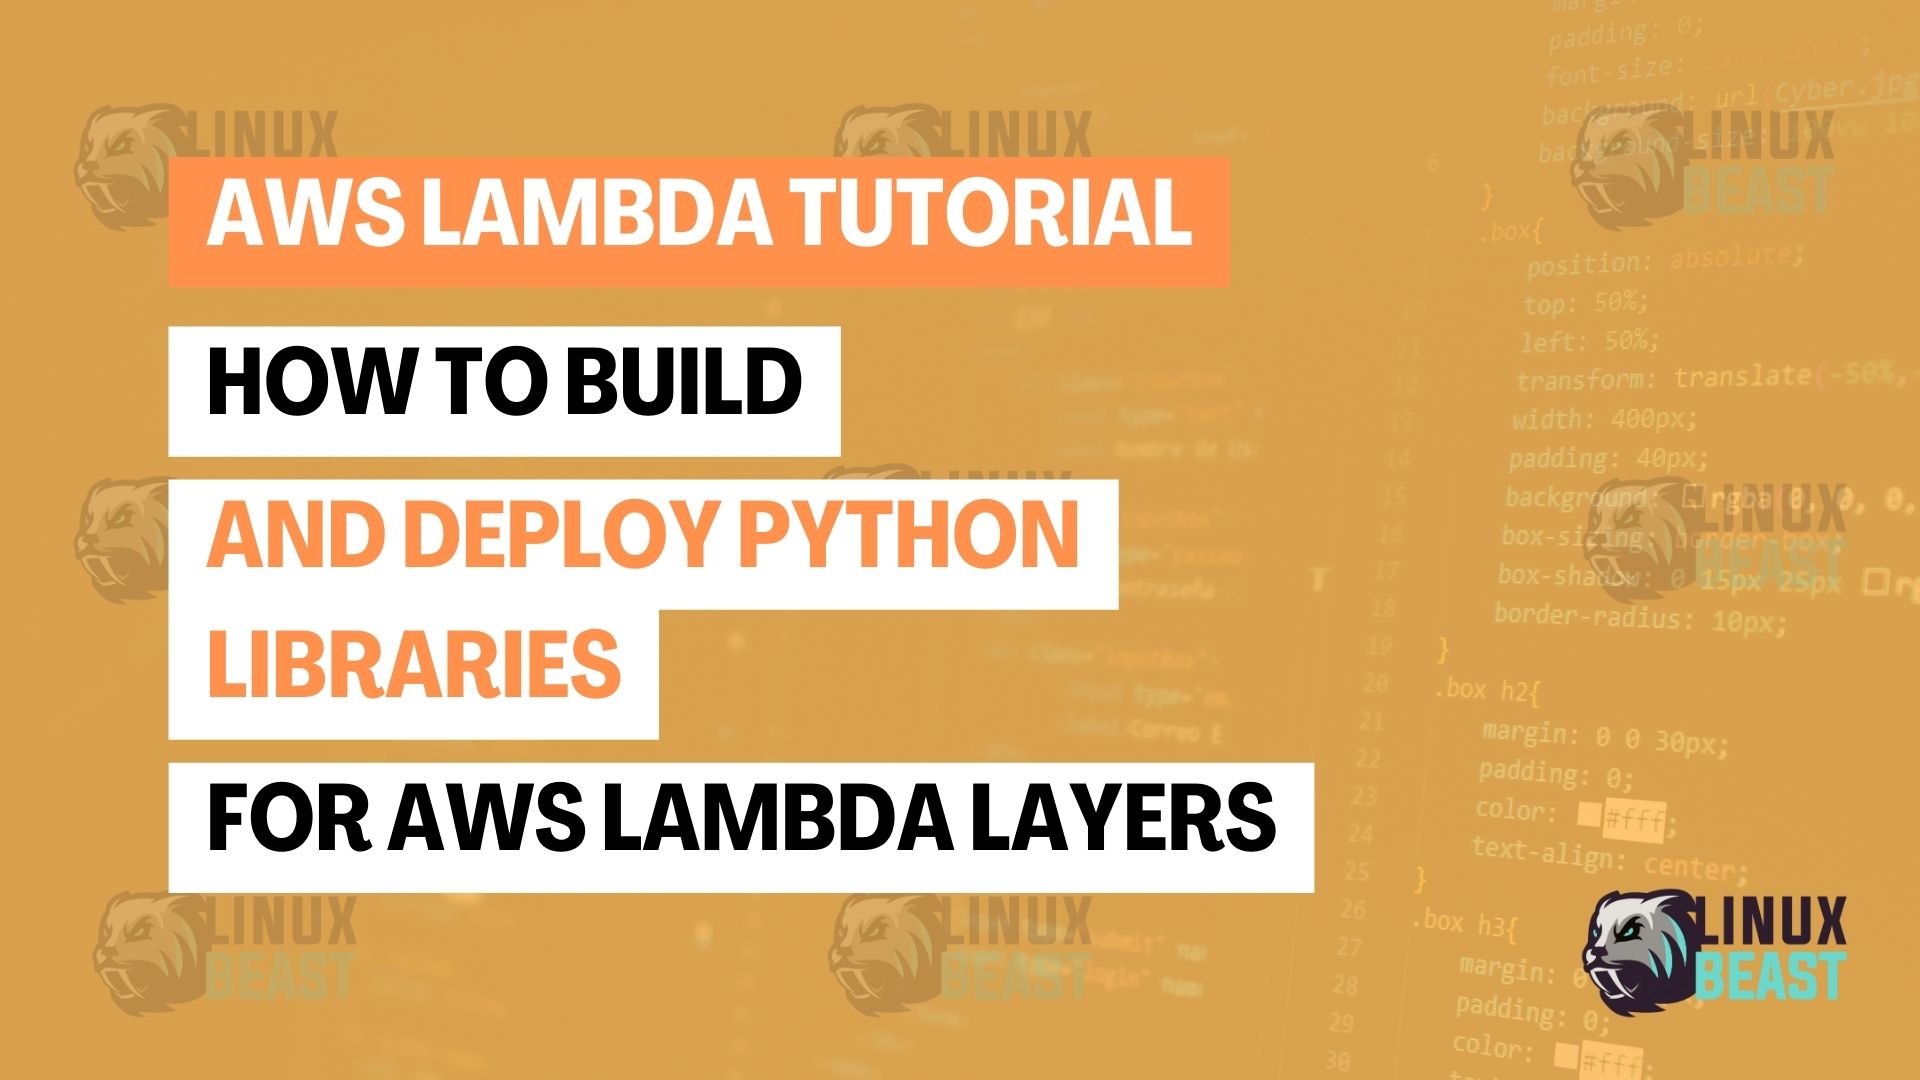 How to Build and Deploy Python Libraries for AWS Lambda Layers